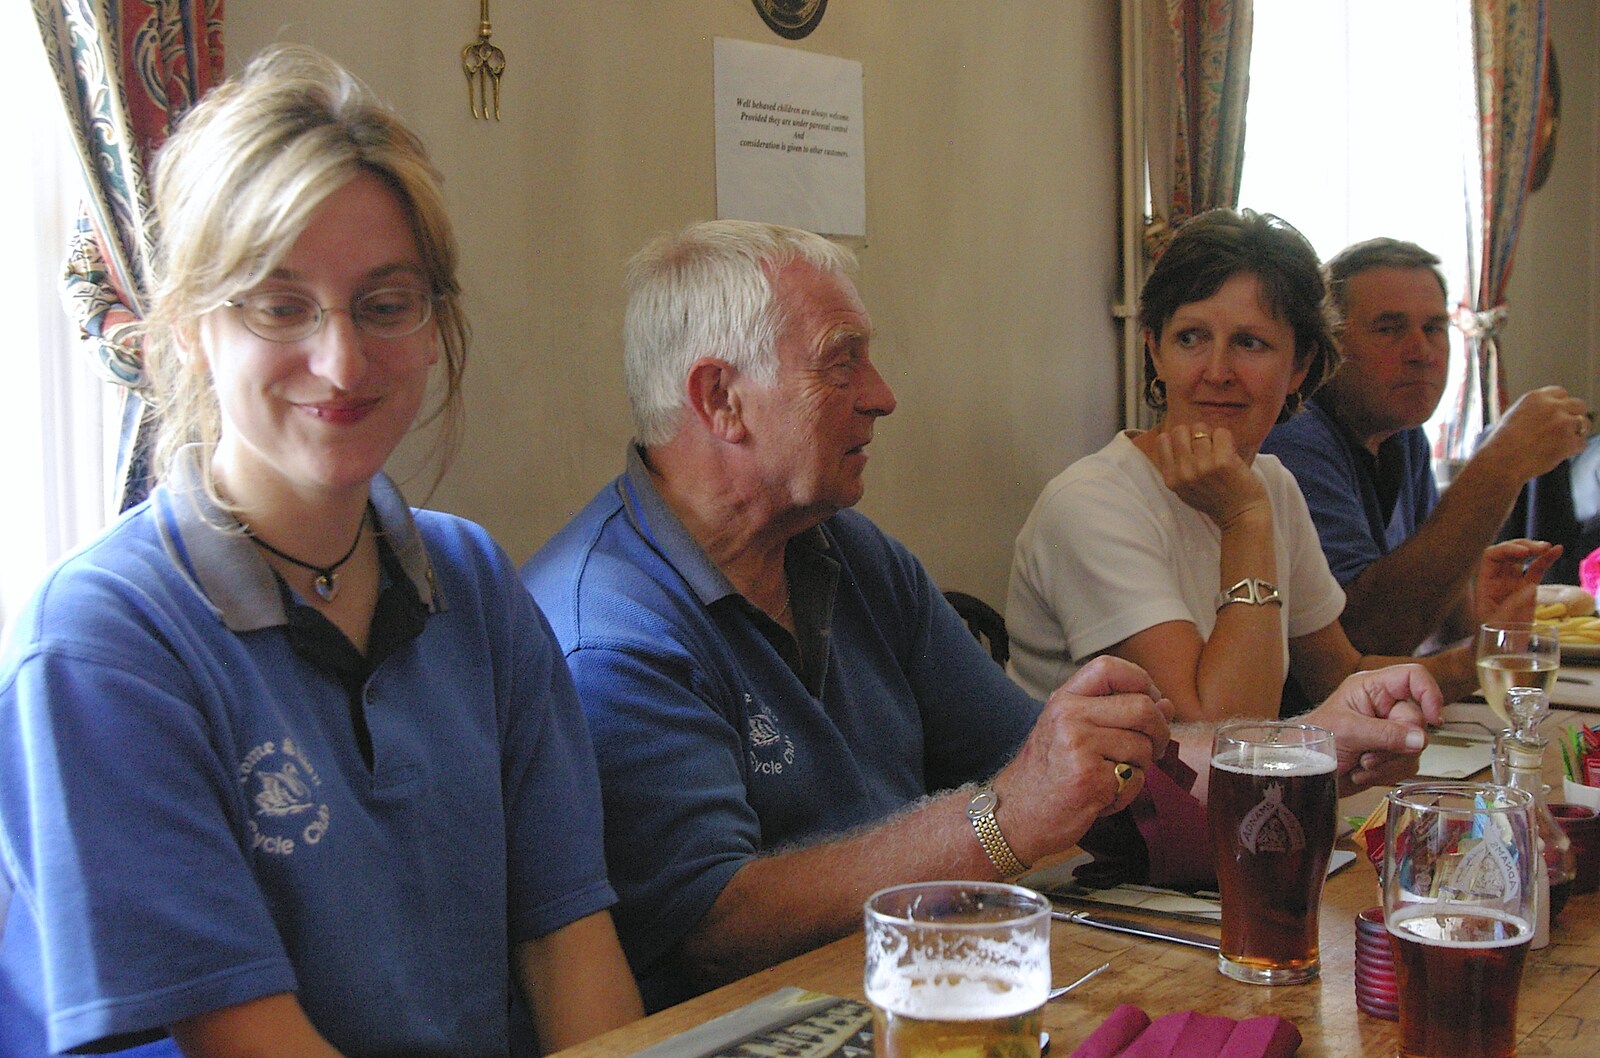 Suey, Colin, Jill and Alan from The BSCC Charity Bike Ride, Orford, Suffolk - 15th July 2006